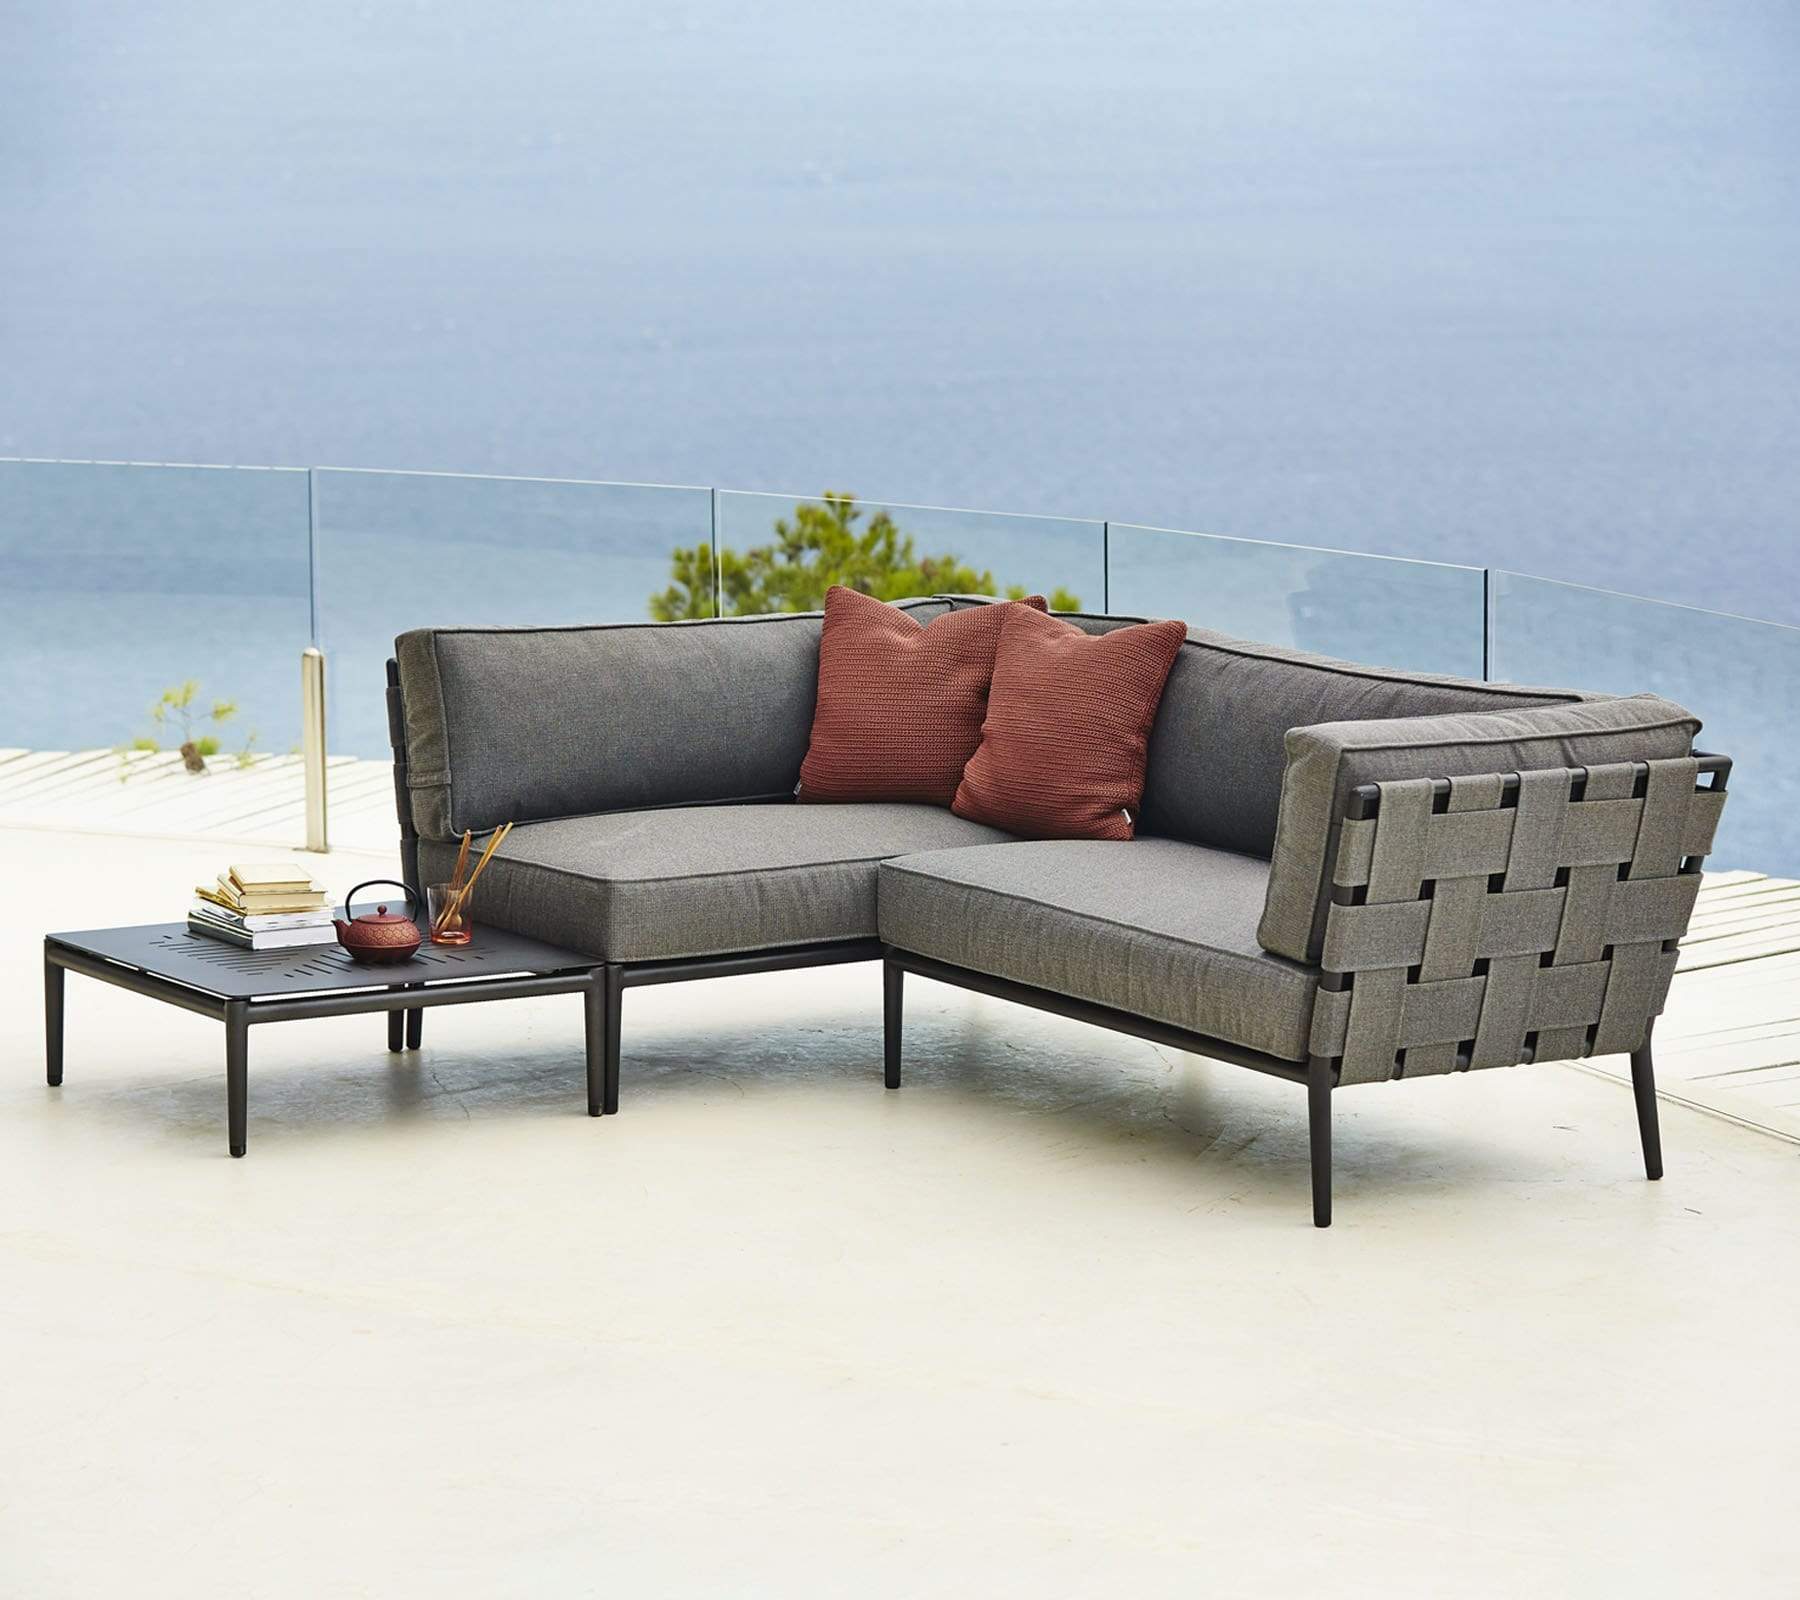 Boxhill's Conic Outdoor Coffee Table Grey lifestyle image with Conic Sectional Sofa 